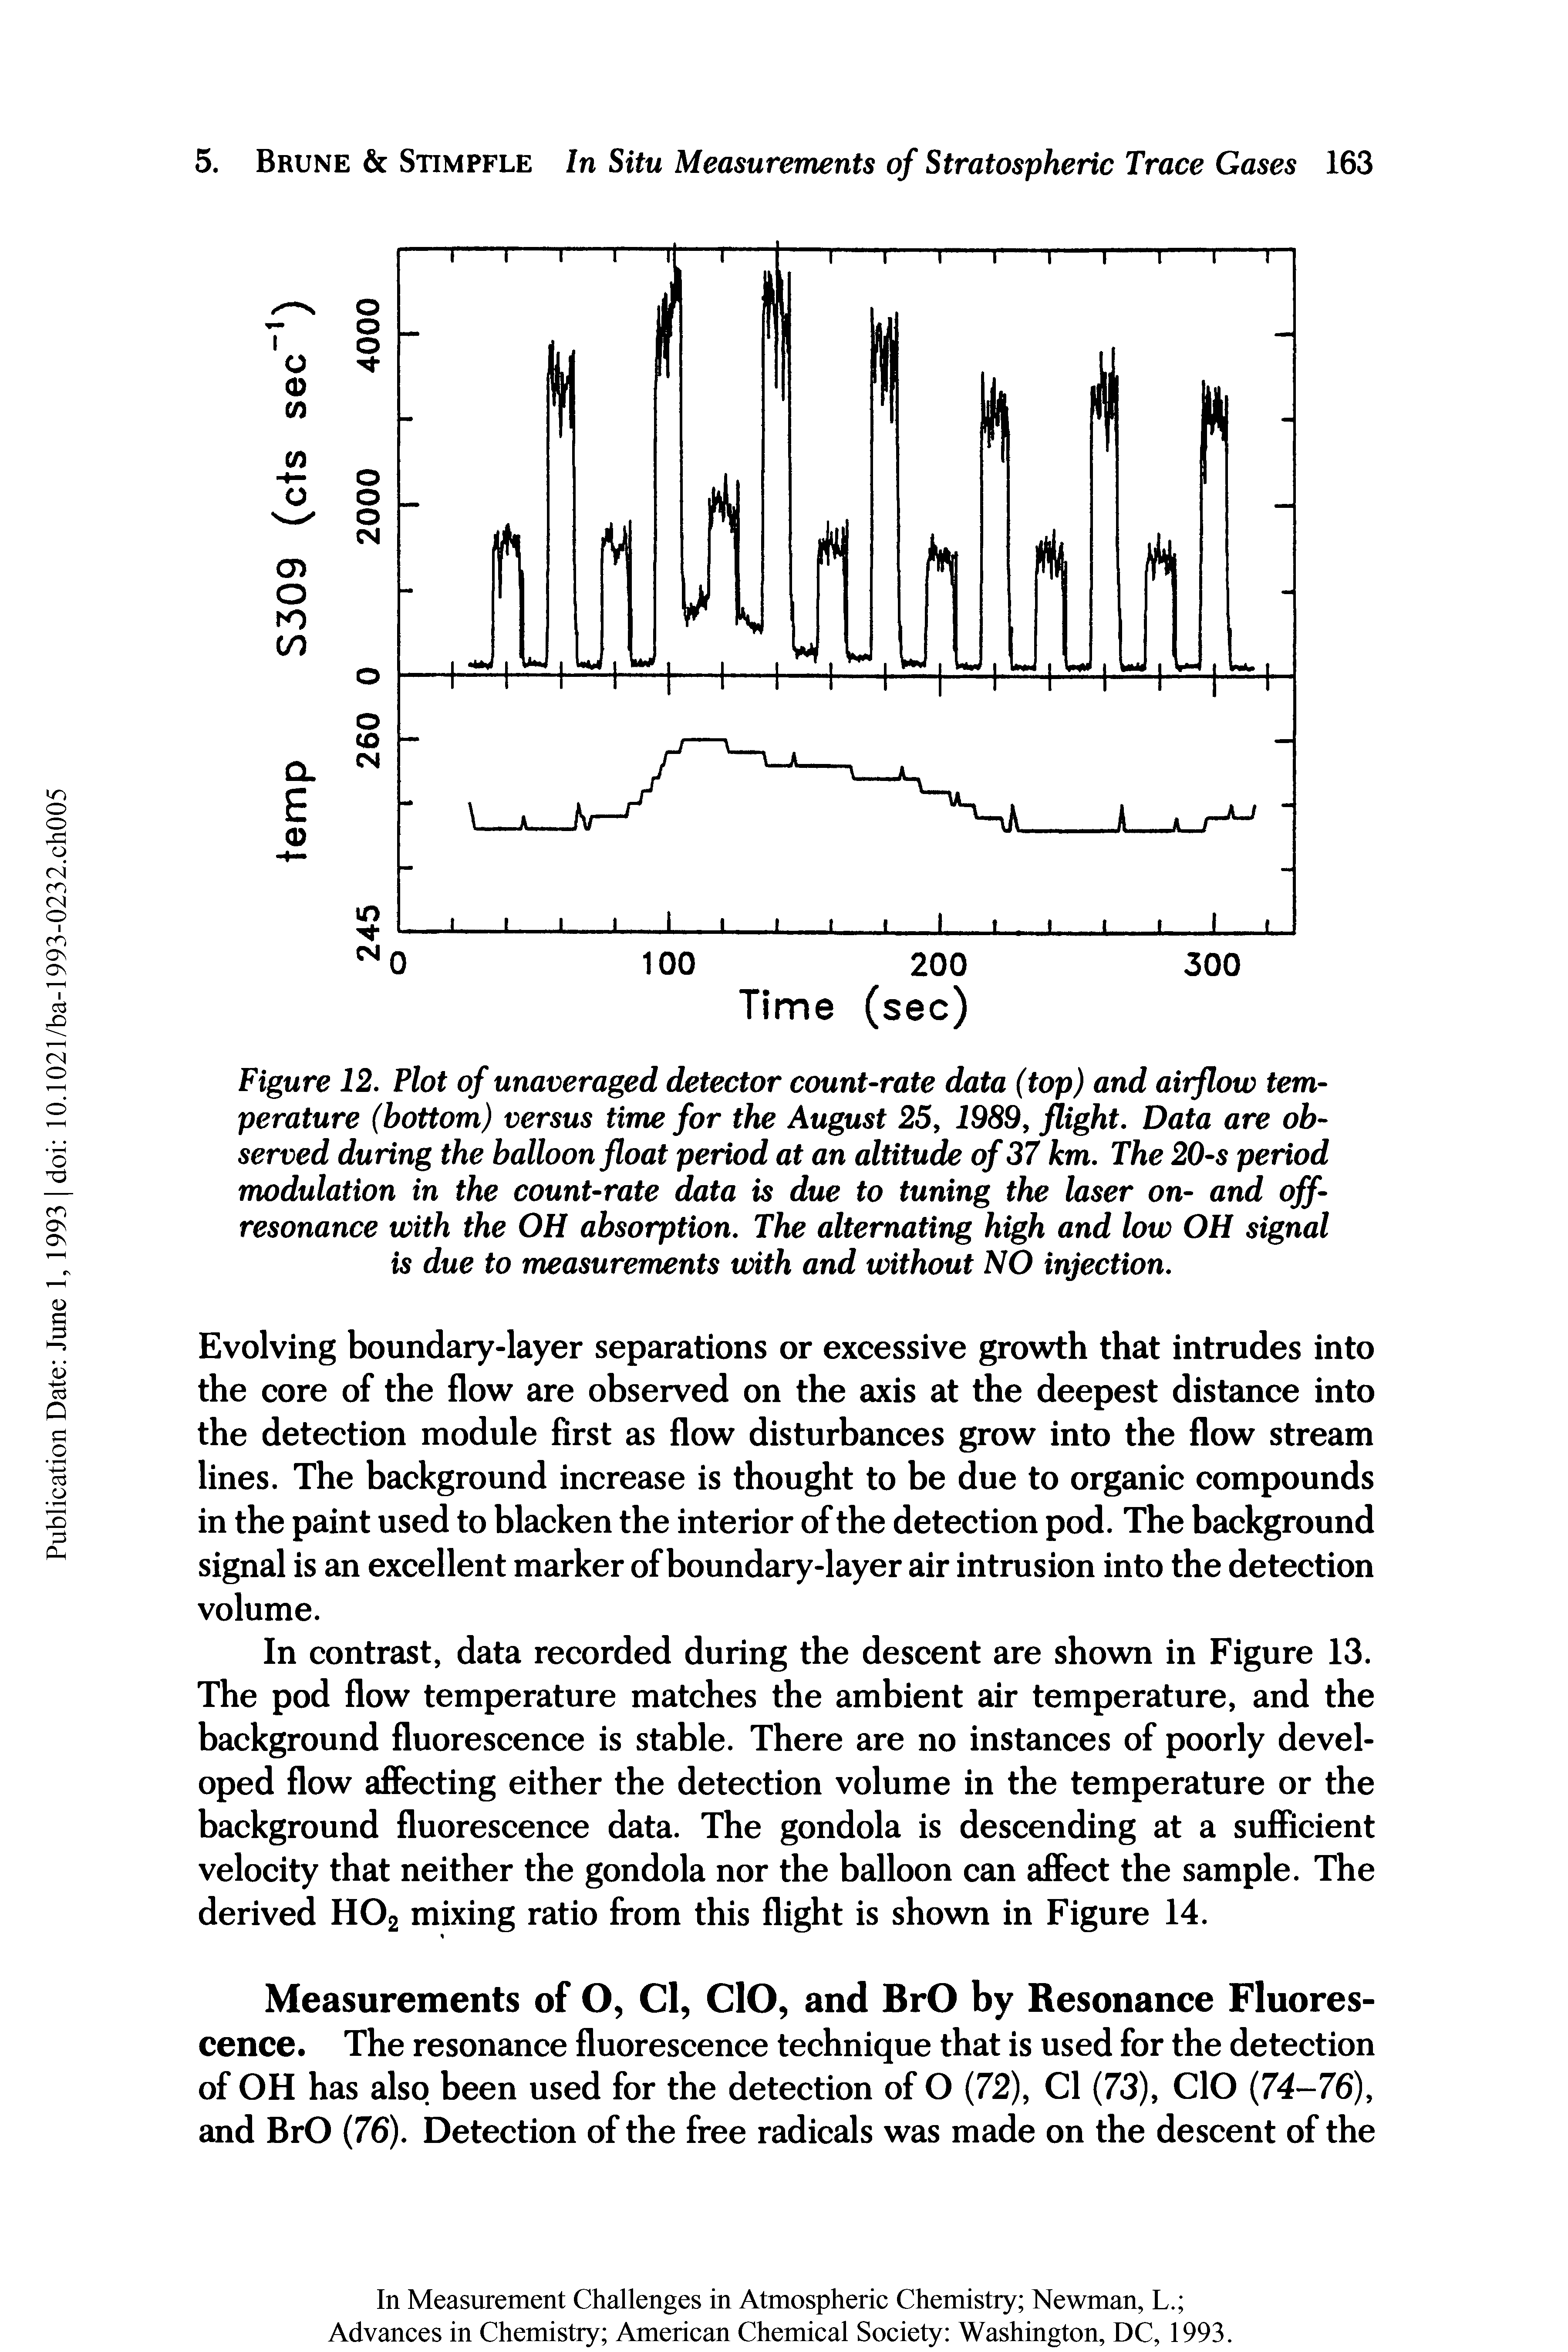 Figure 12. Plot of unaveraged detector count-rate data (top) and airflow temperature (bottom) versus time for the August 25, 1989, flight. Data are observed during the balloon float period at an altitude of 37 km. The 20-s period modulation in the count-rate data is due to tuning the laser on- and off-resonance with the OH absorption. The alternating high and low OH signal is due to measurements with and without NO injection.